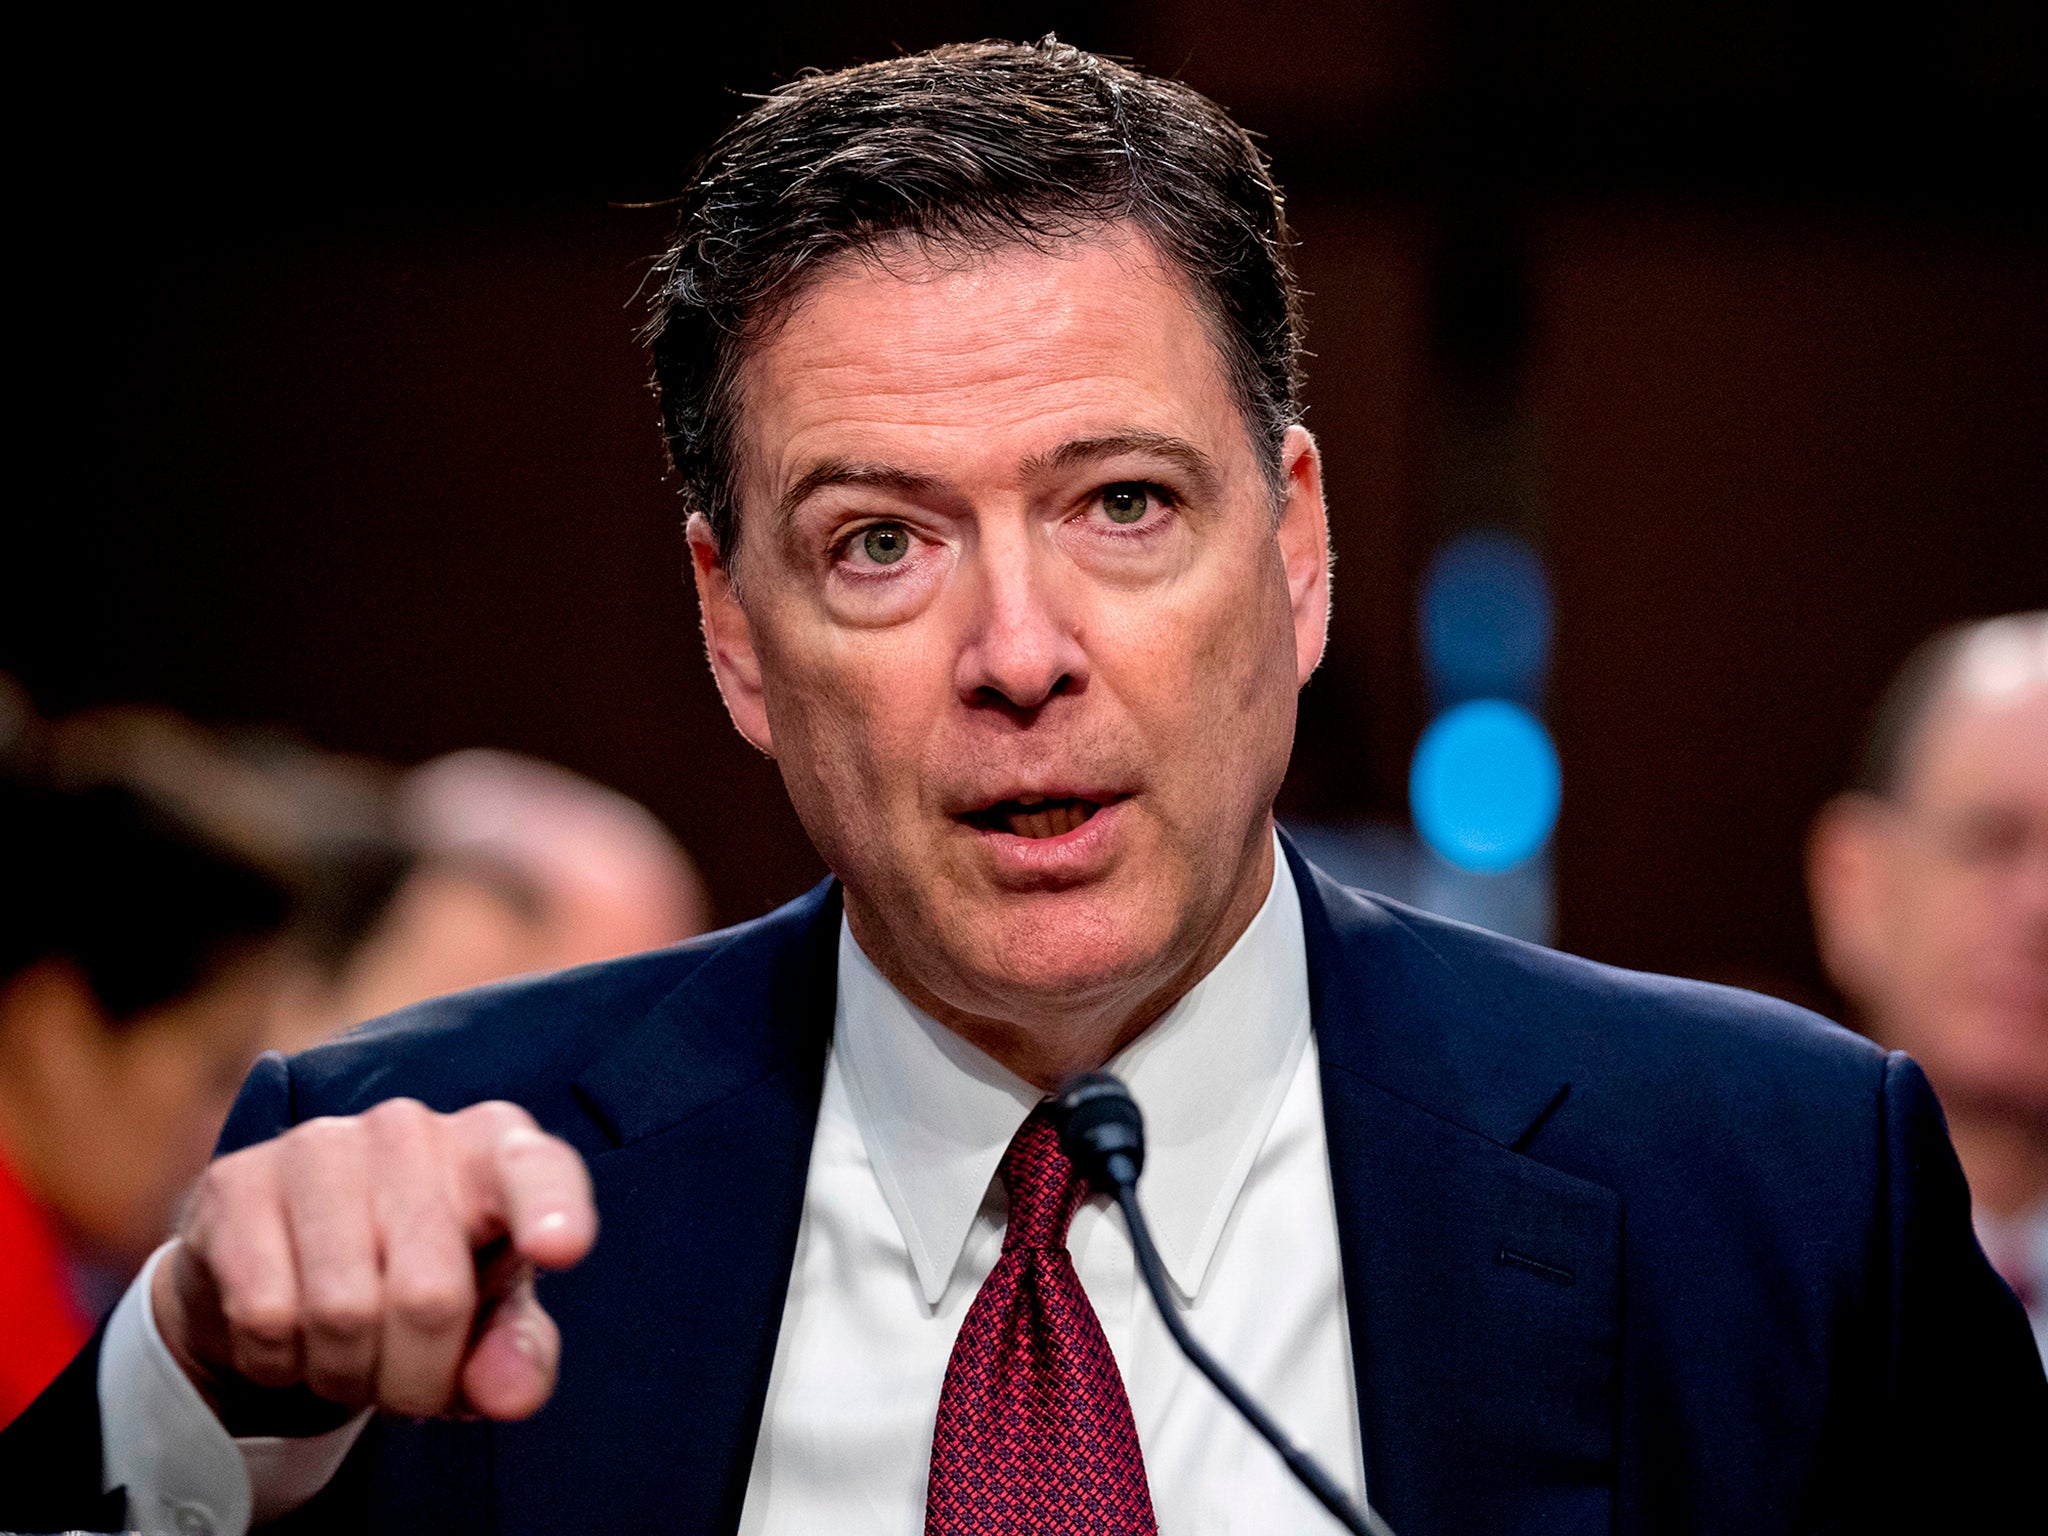 James Comey speaks during a Senate Intelligence Committee hearing